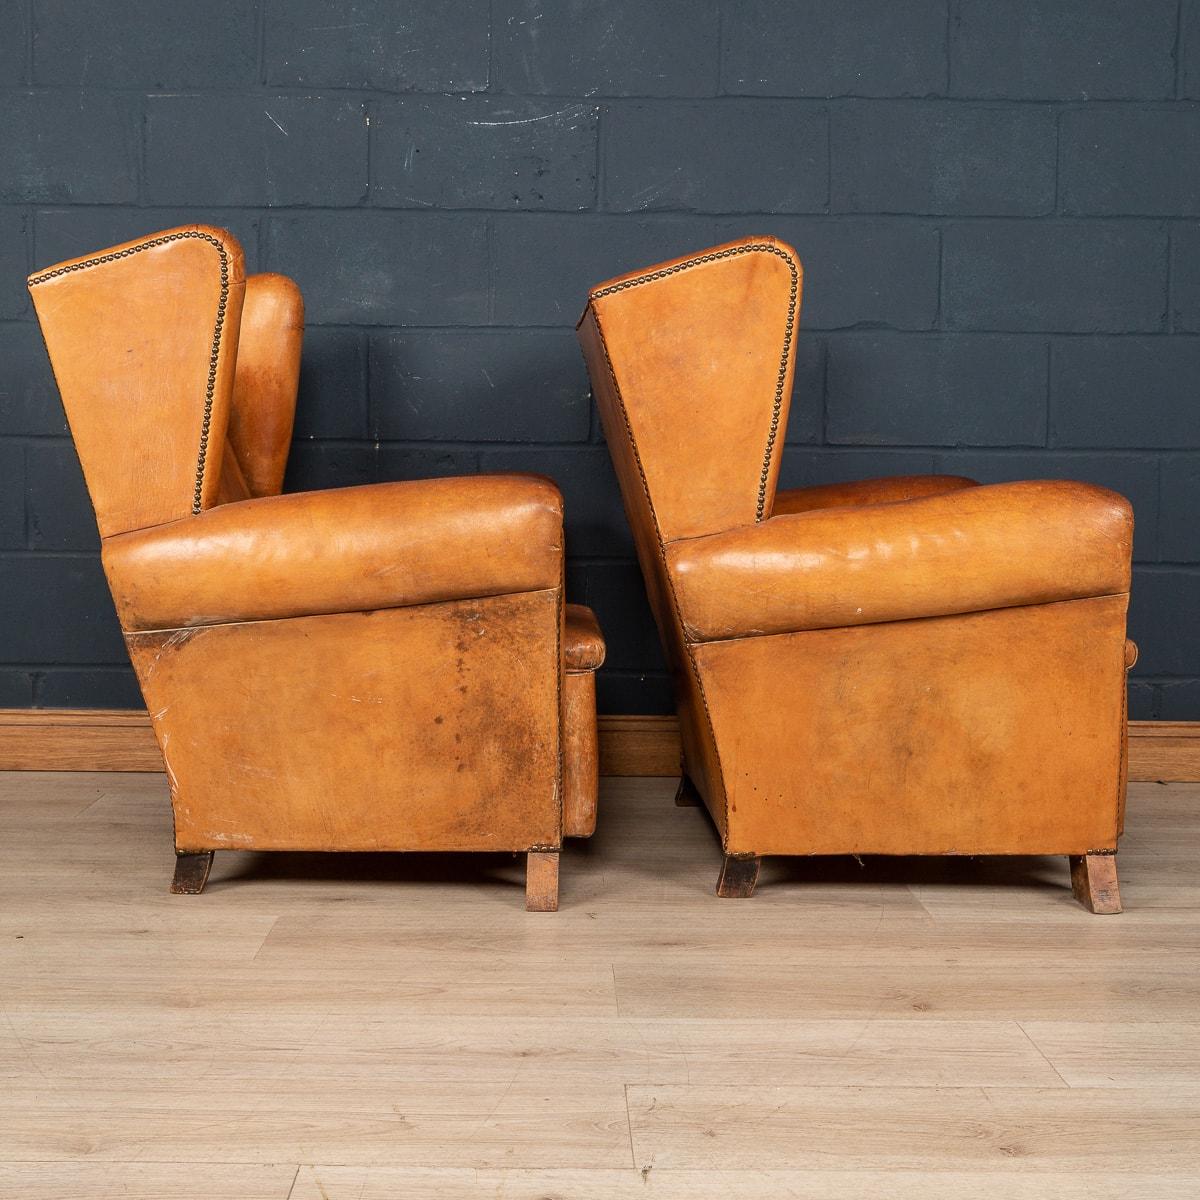 Brass 20th Century Pair of Dutch Sheepskin Leather Wingback Chairs